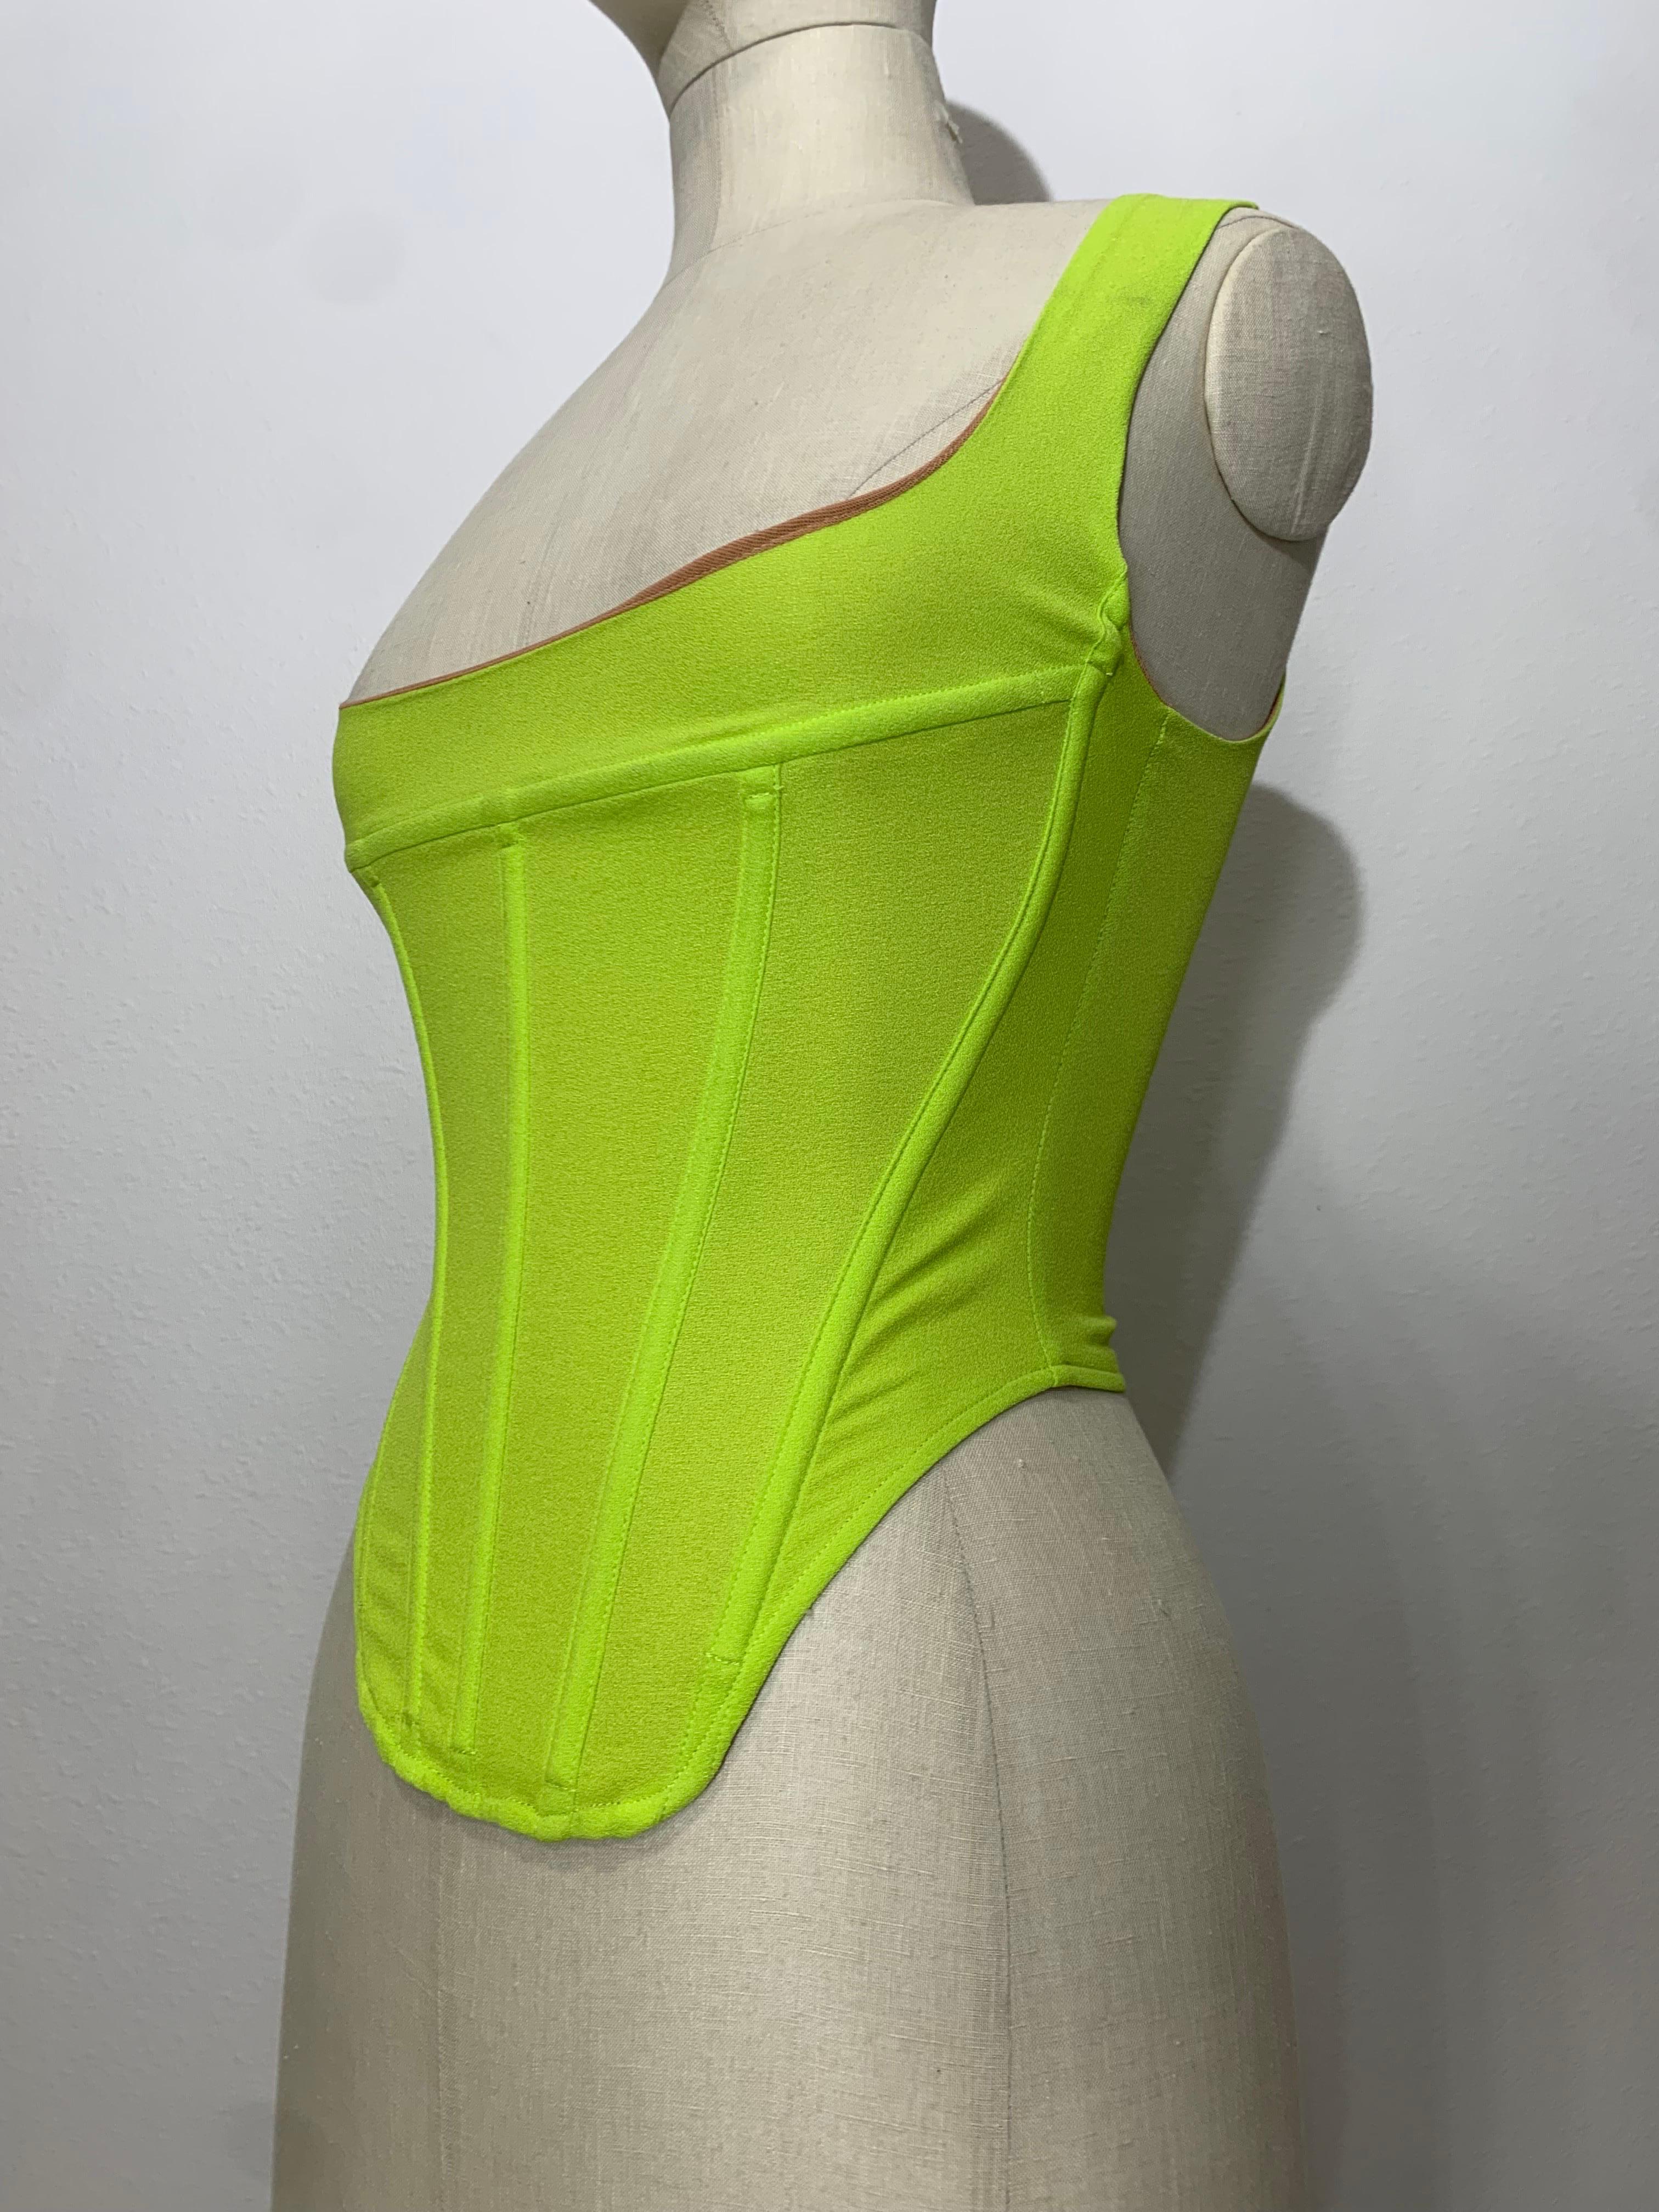 Neon Green Elasticized Mesh Corset w Boning and Full Back Zipper In Excellent Condition For Sale In Gresham, OR